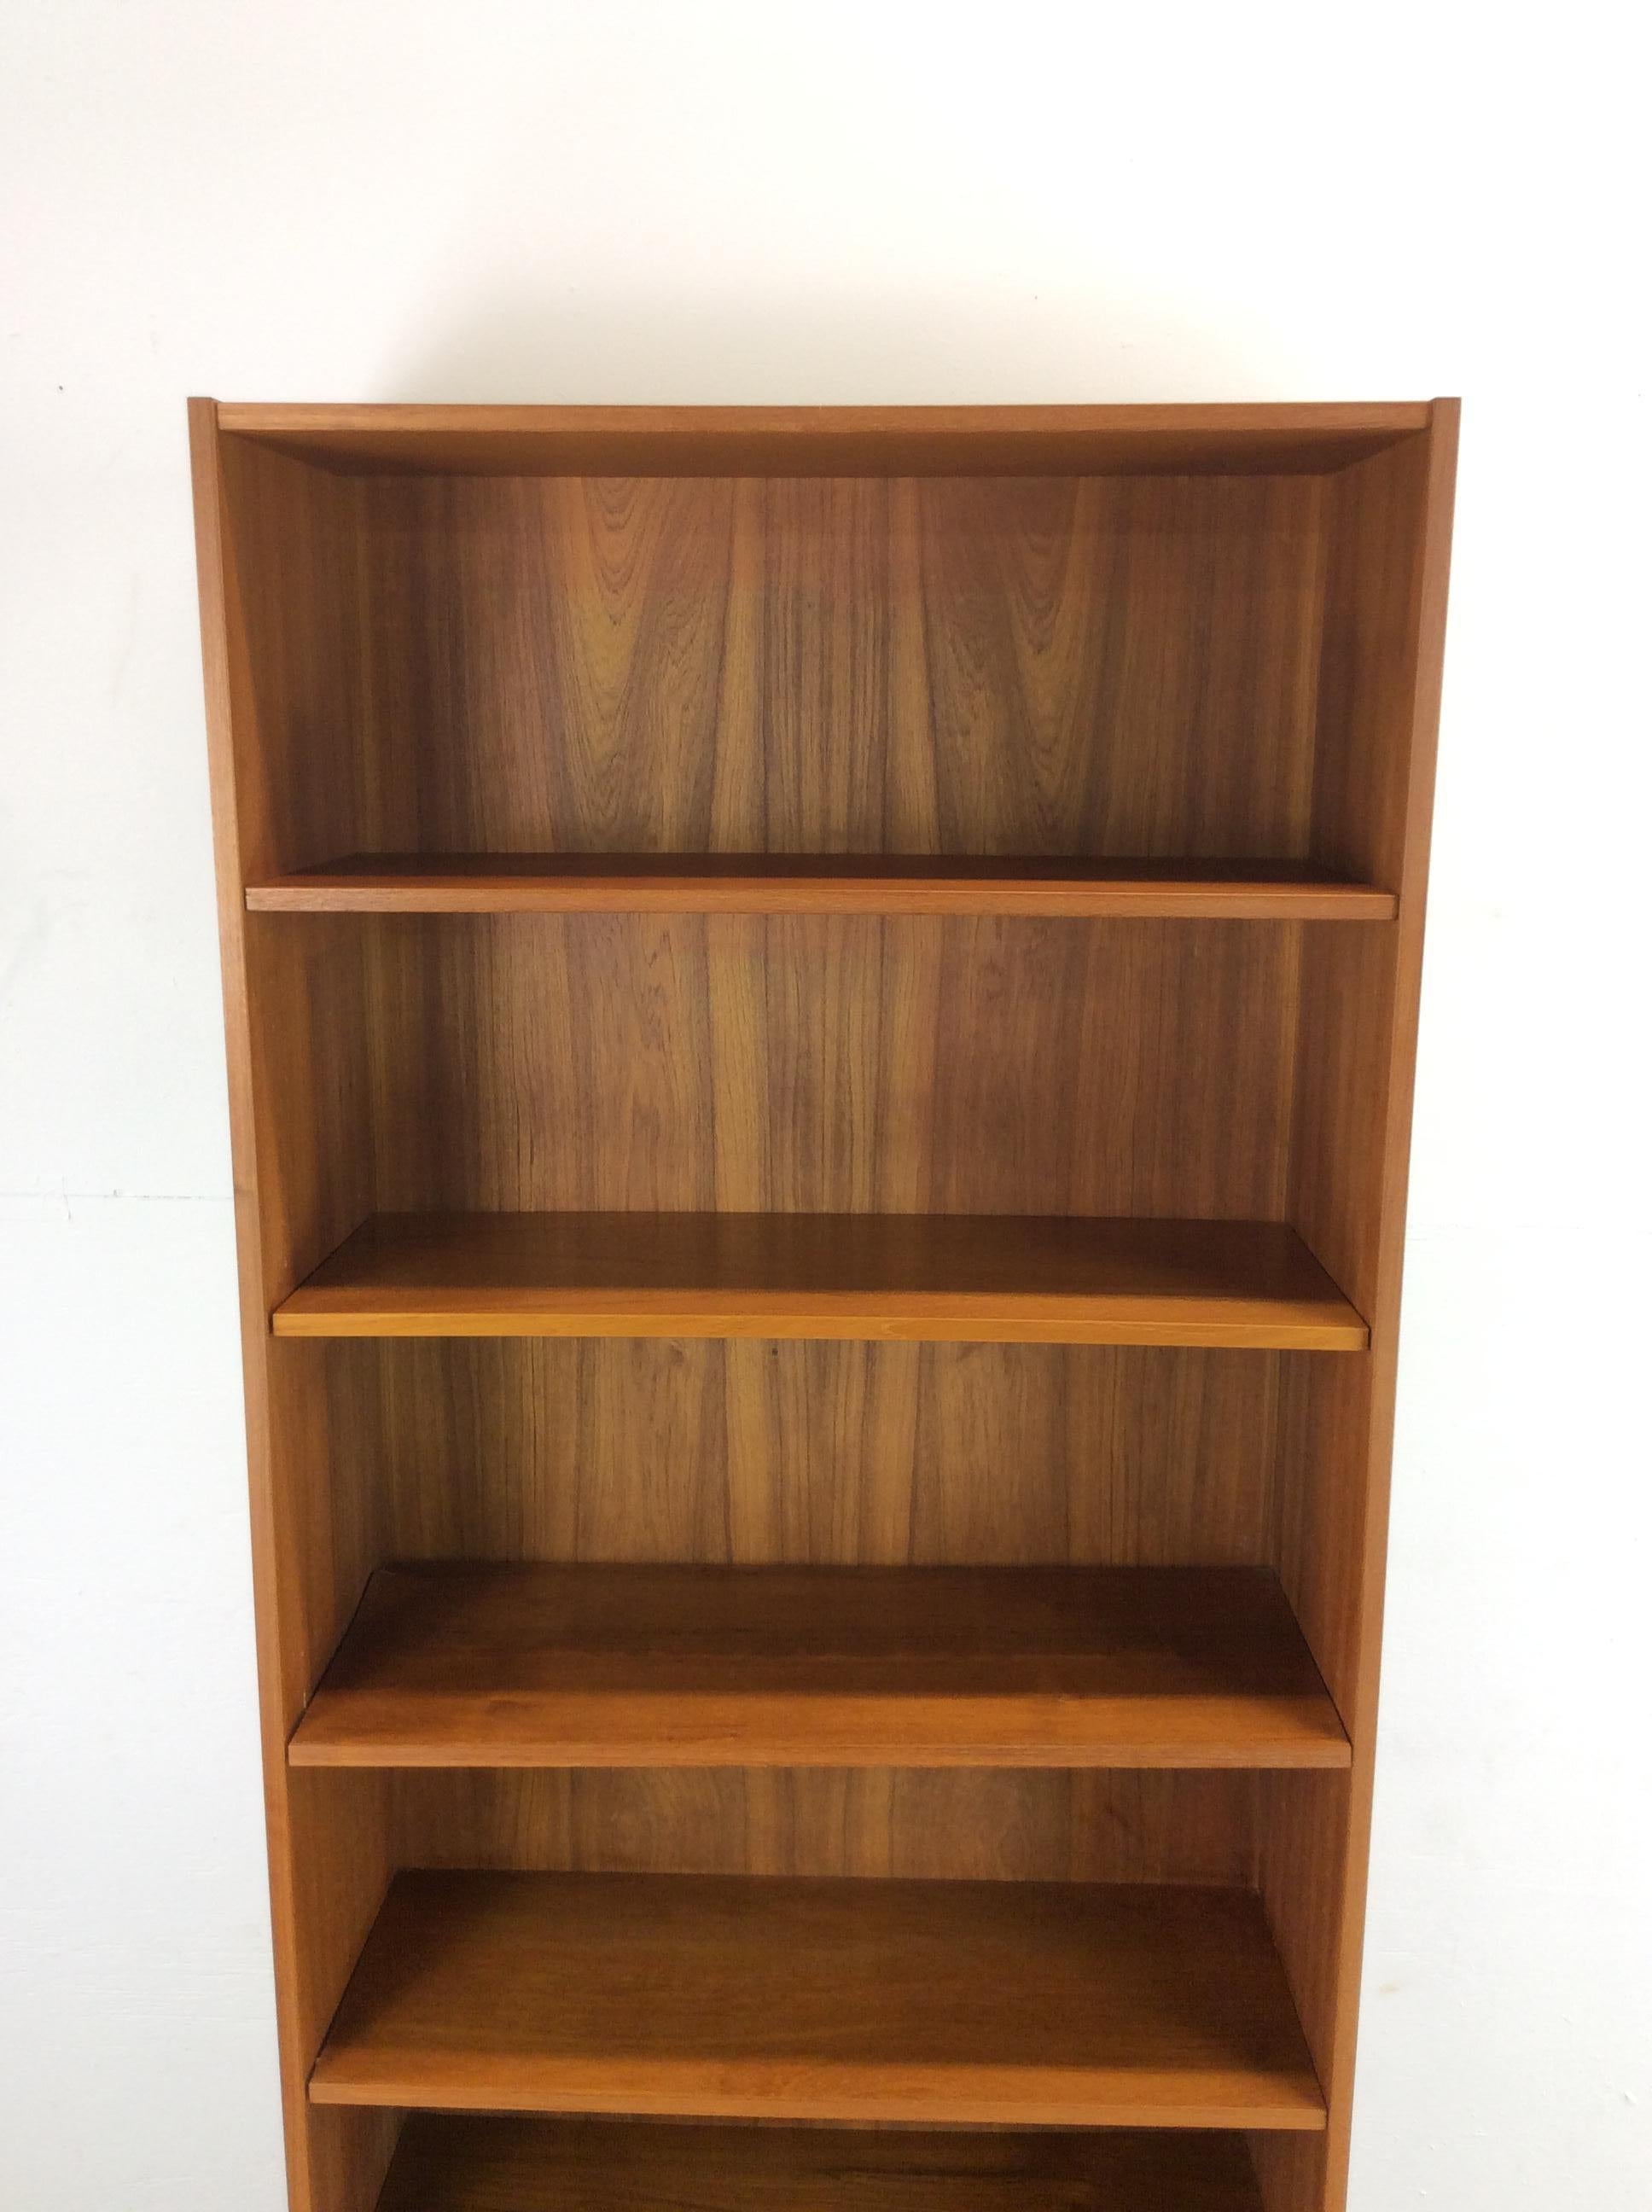 This Danish Modern bookcase features pressed wood construction, beautiful teak veneer with original finish, and five adjustable shelves.

Matching bookcase and other complimentary Danish items available separately.

Dimensions: 31.5w 11.5d 72.25h